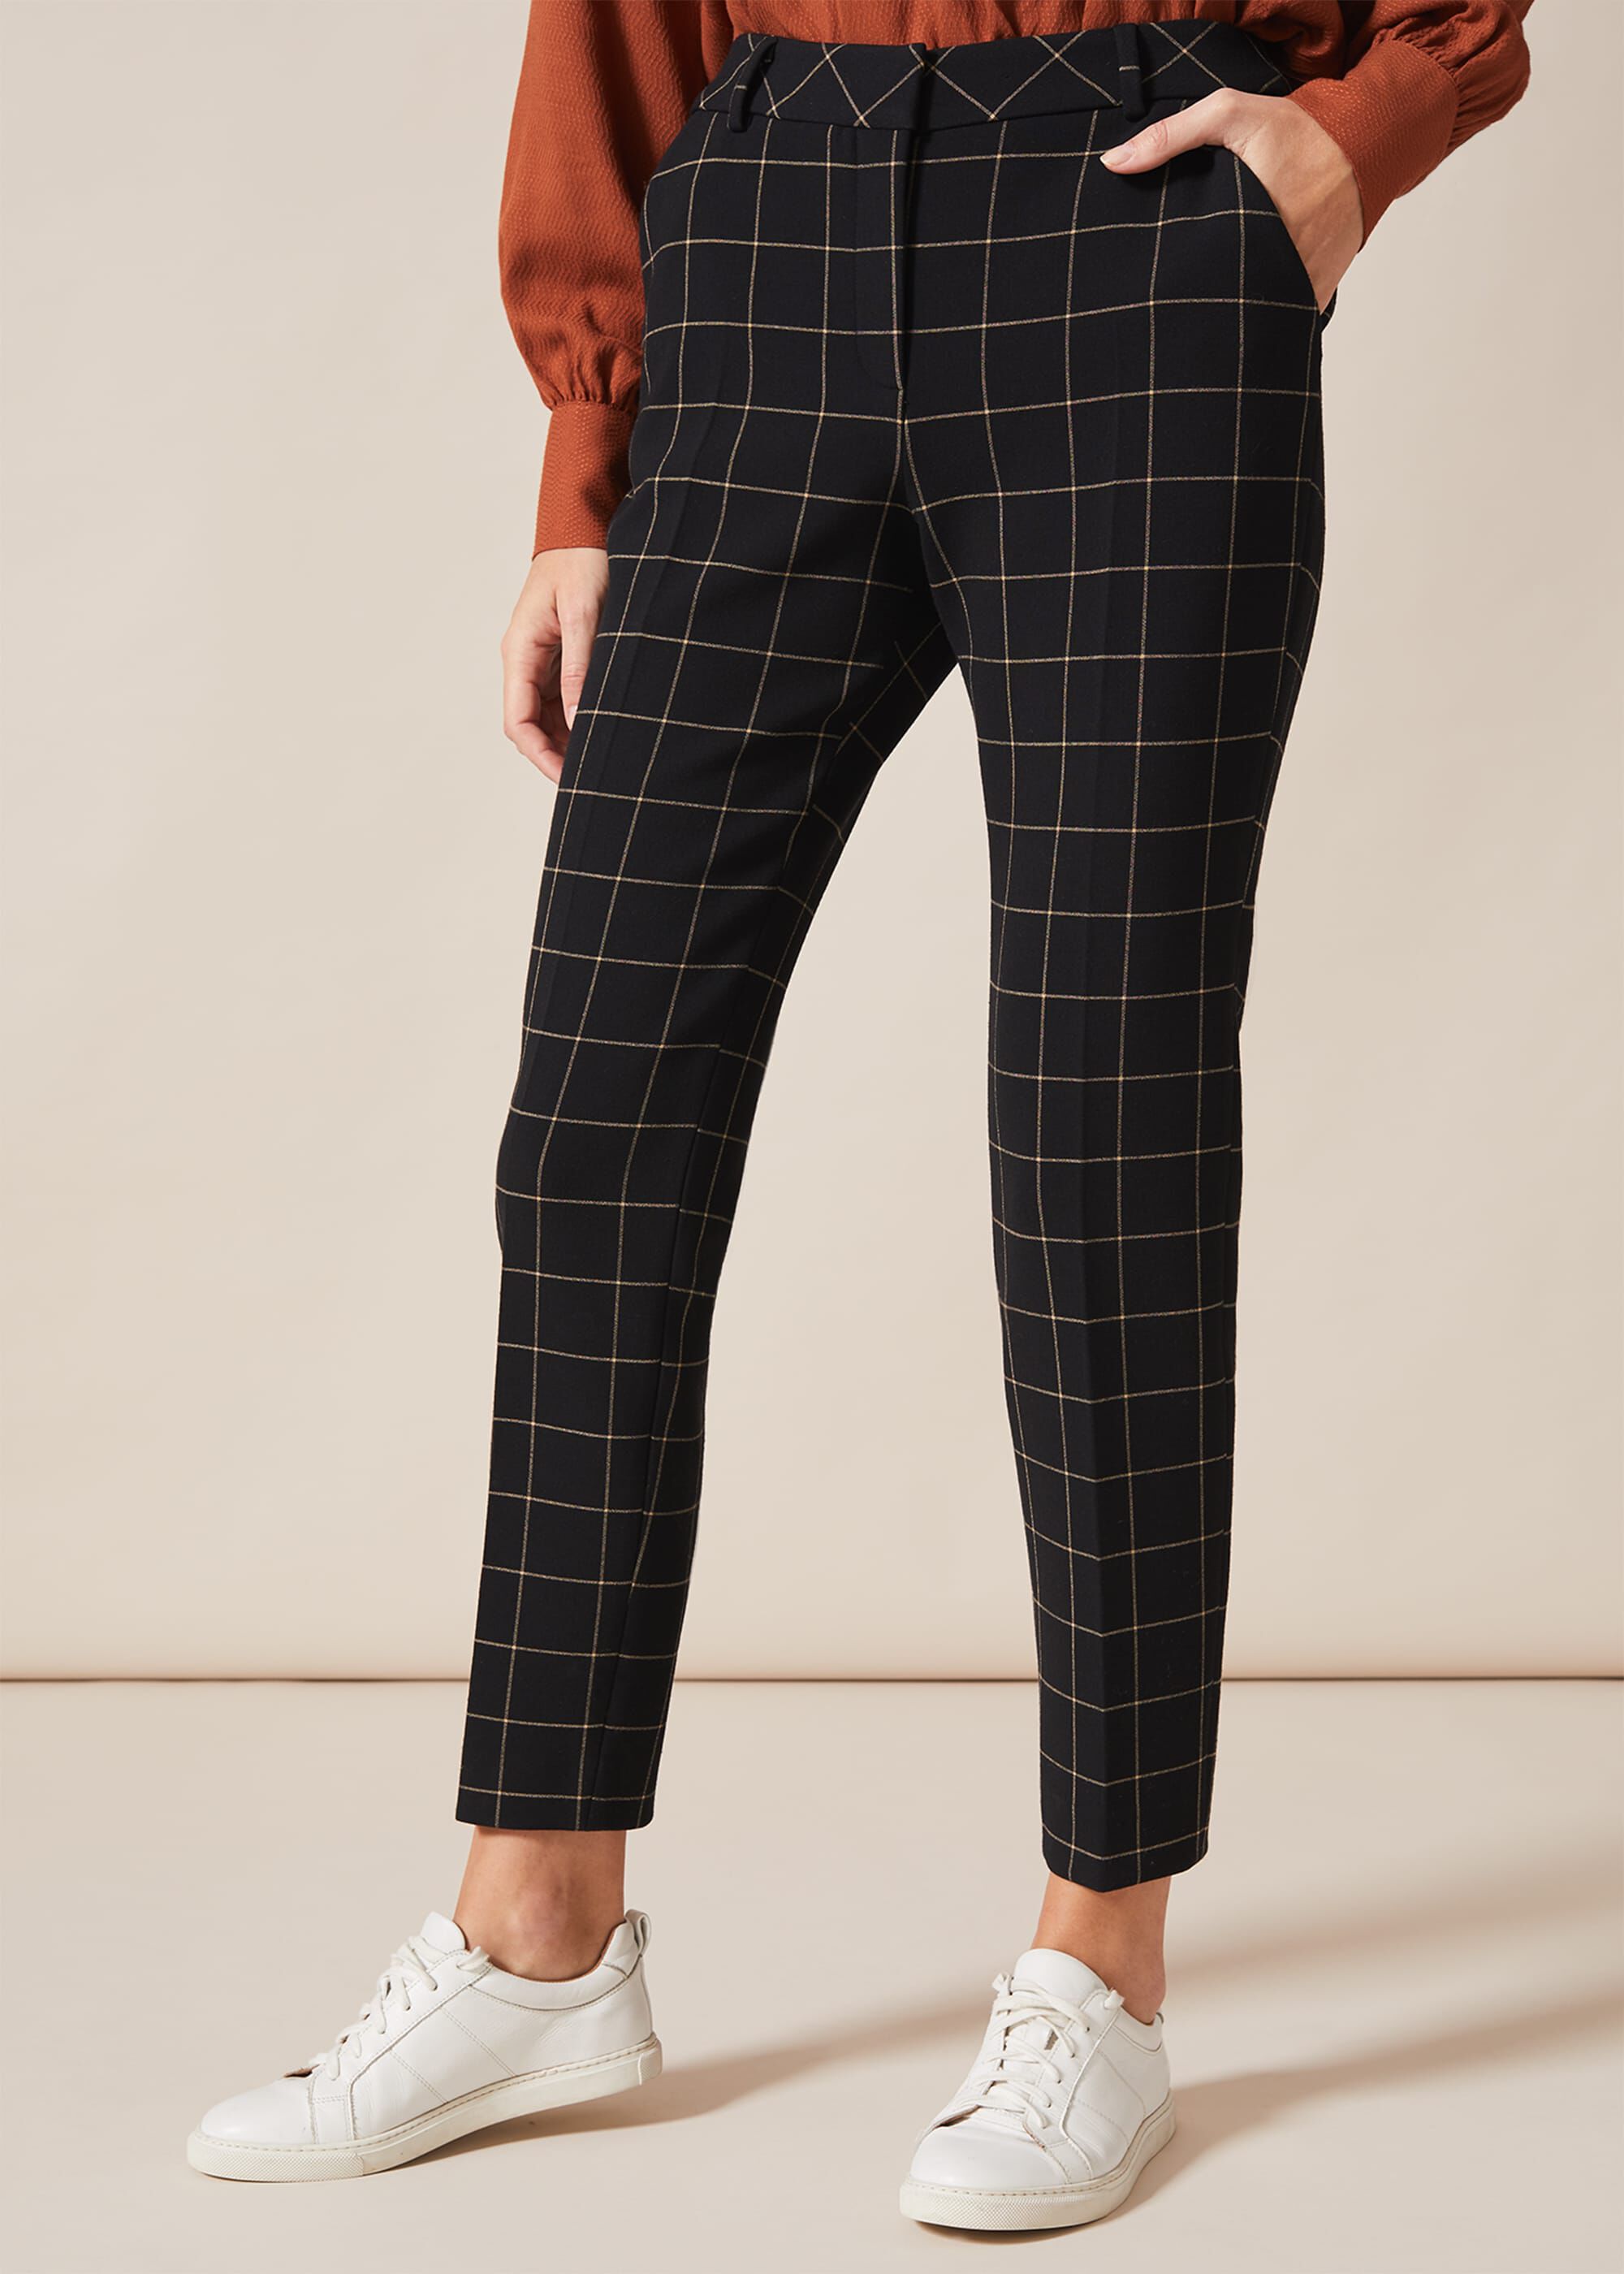 21 Chic Trouser Suits For The Mother Of The Groom Or Bride